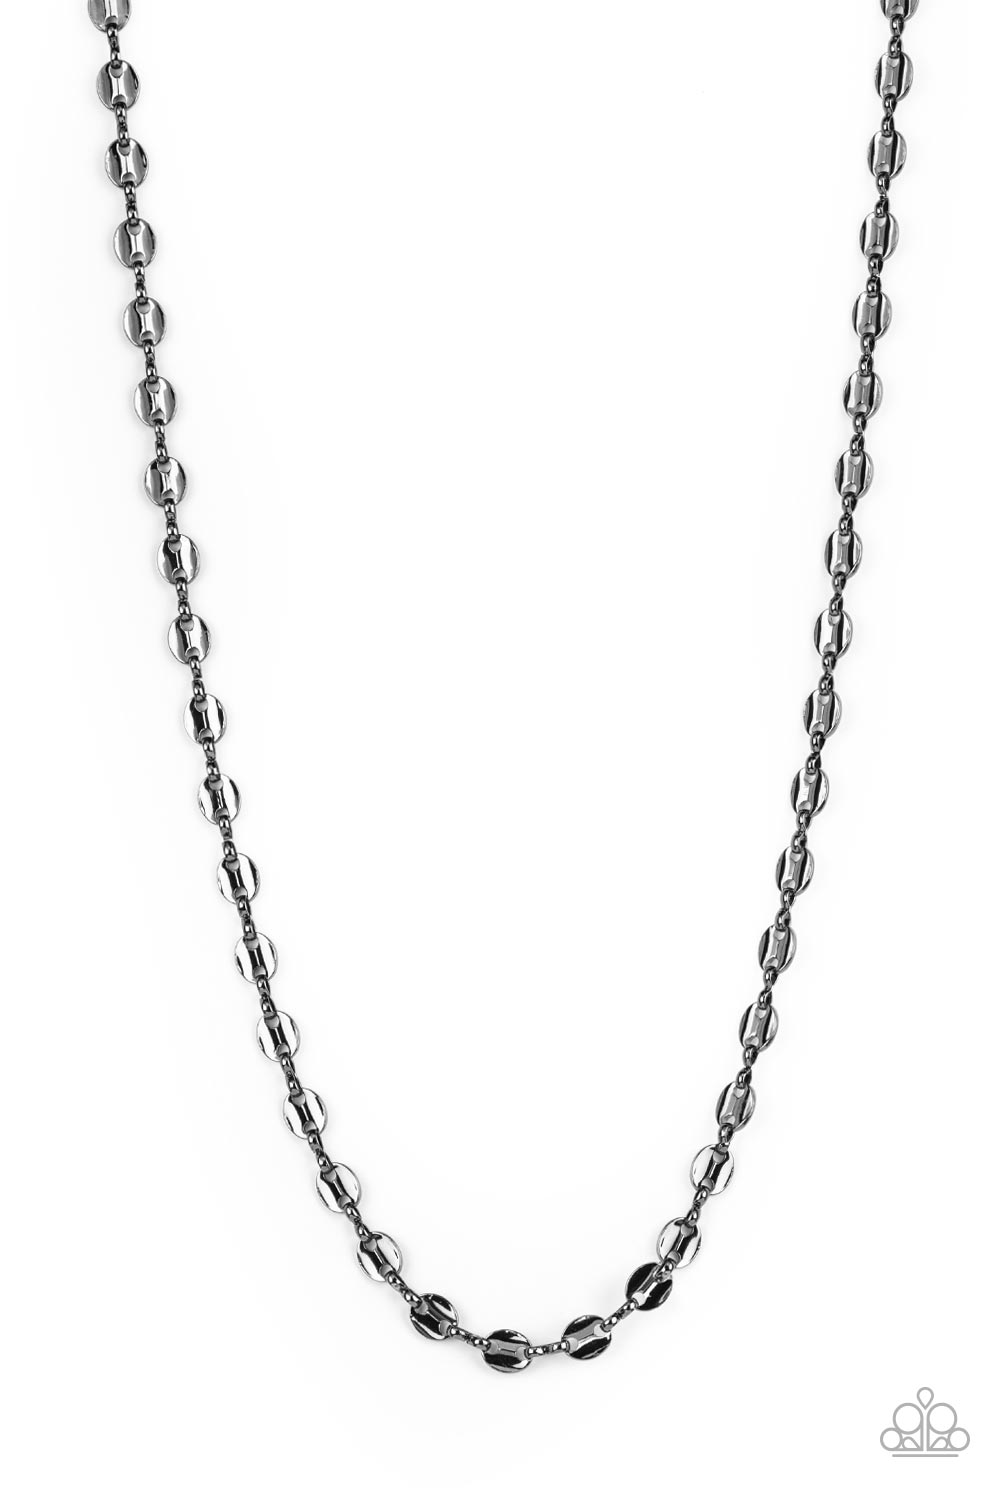 Come Out Swinging - black - Paparazzi MENS necklace